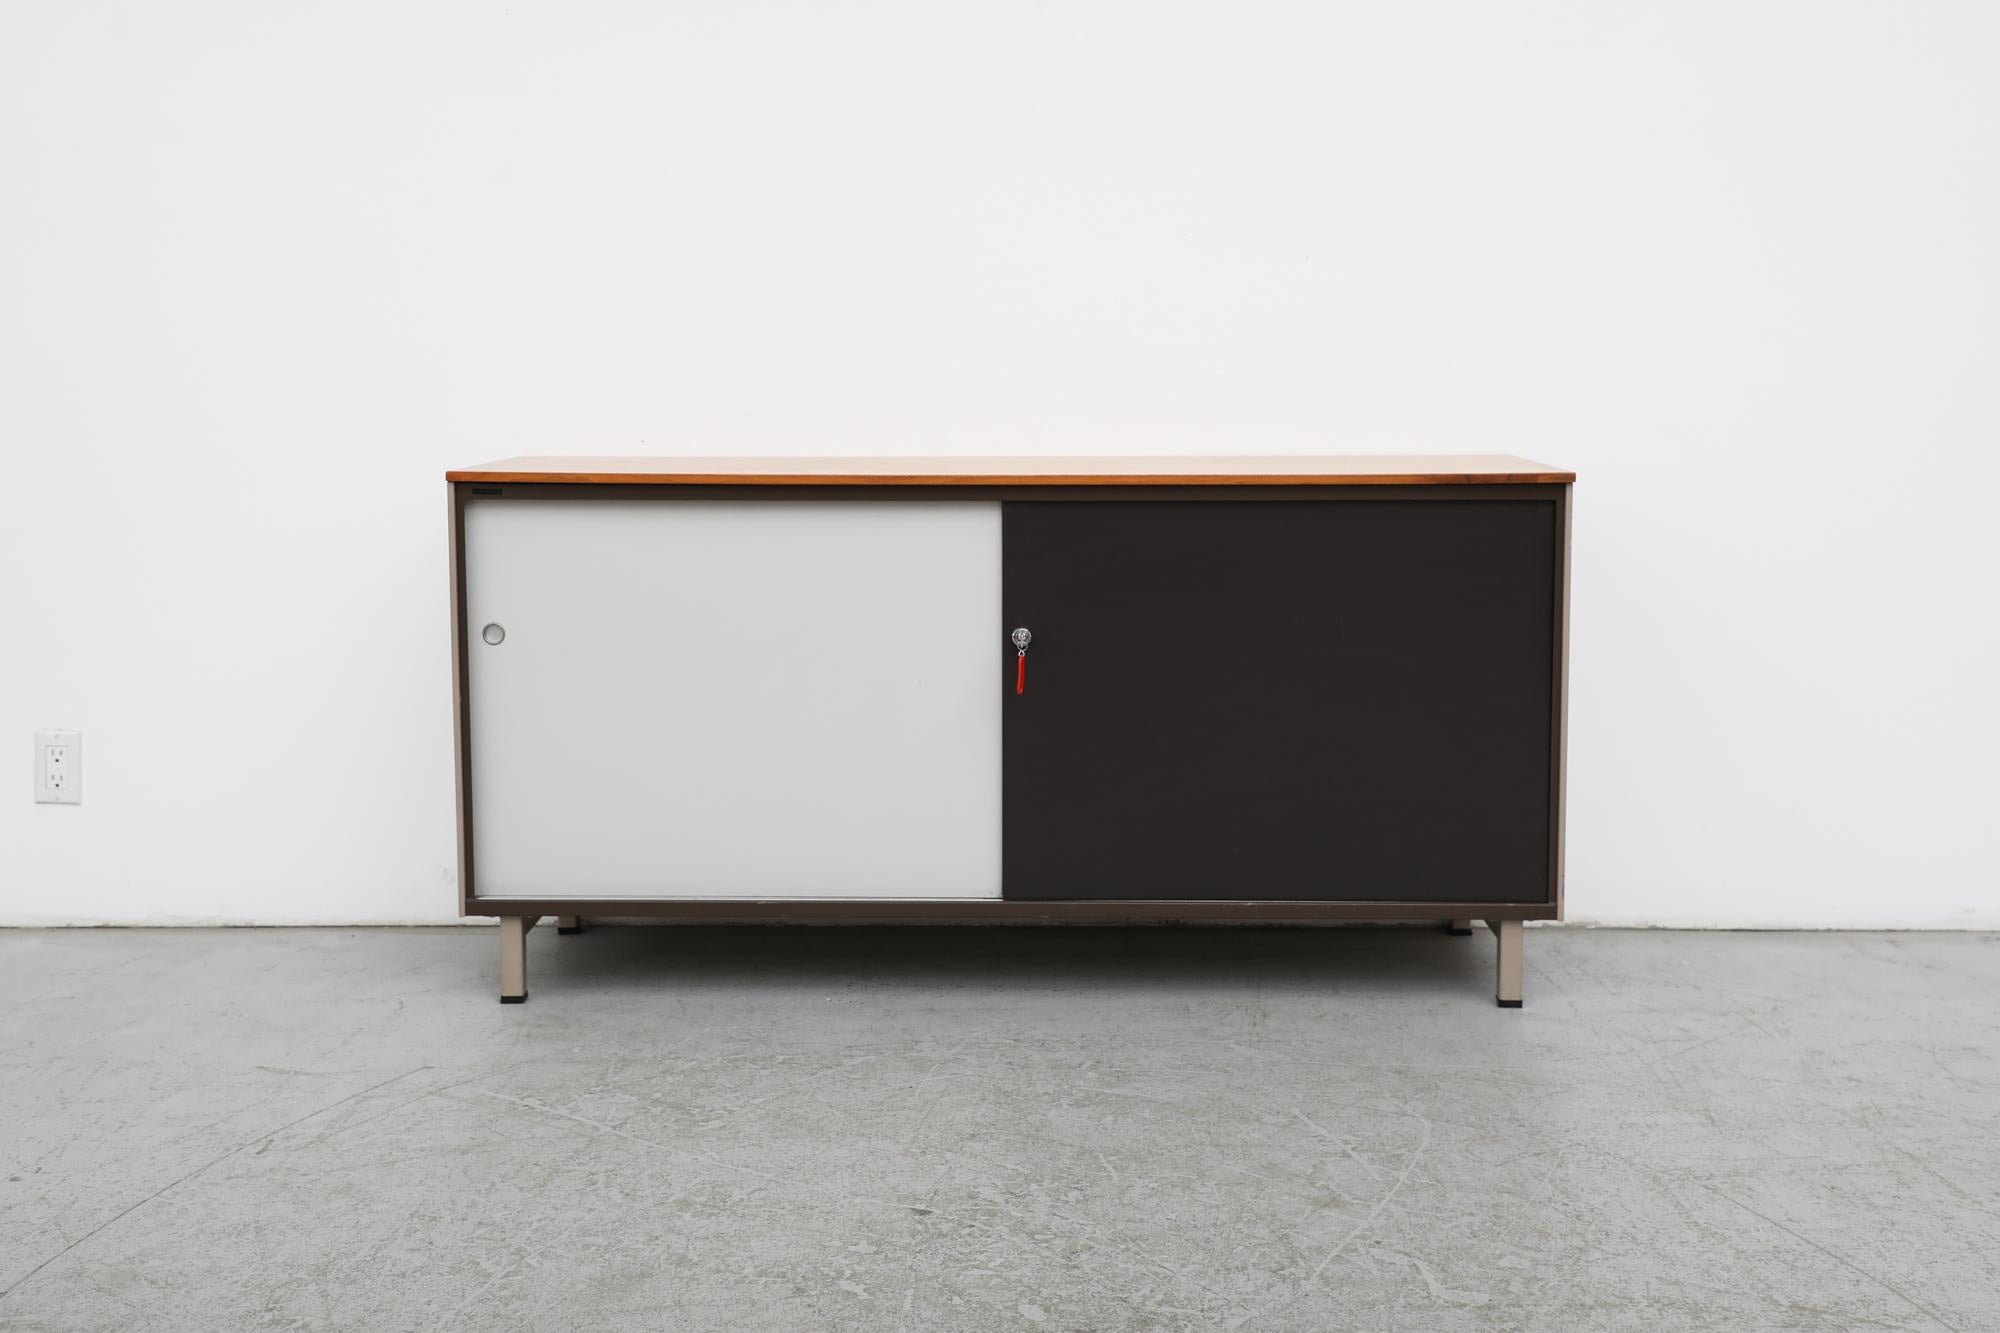 Gispen industrial cabinet or sideboard with wood top and sliding doors. Beige enameled metal frame with grey and black enameled metal sliding doors with round metal inset pulls and can lock. The backs are finished making this piece a perfect room or